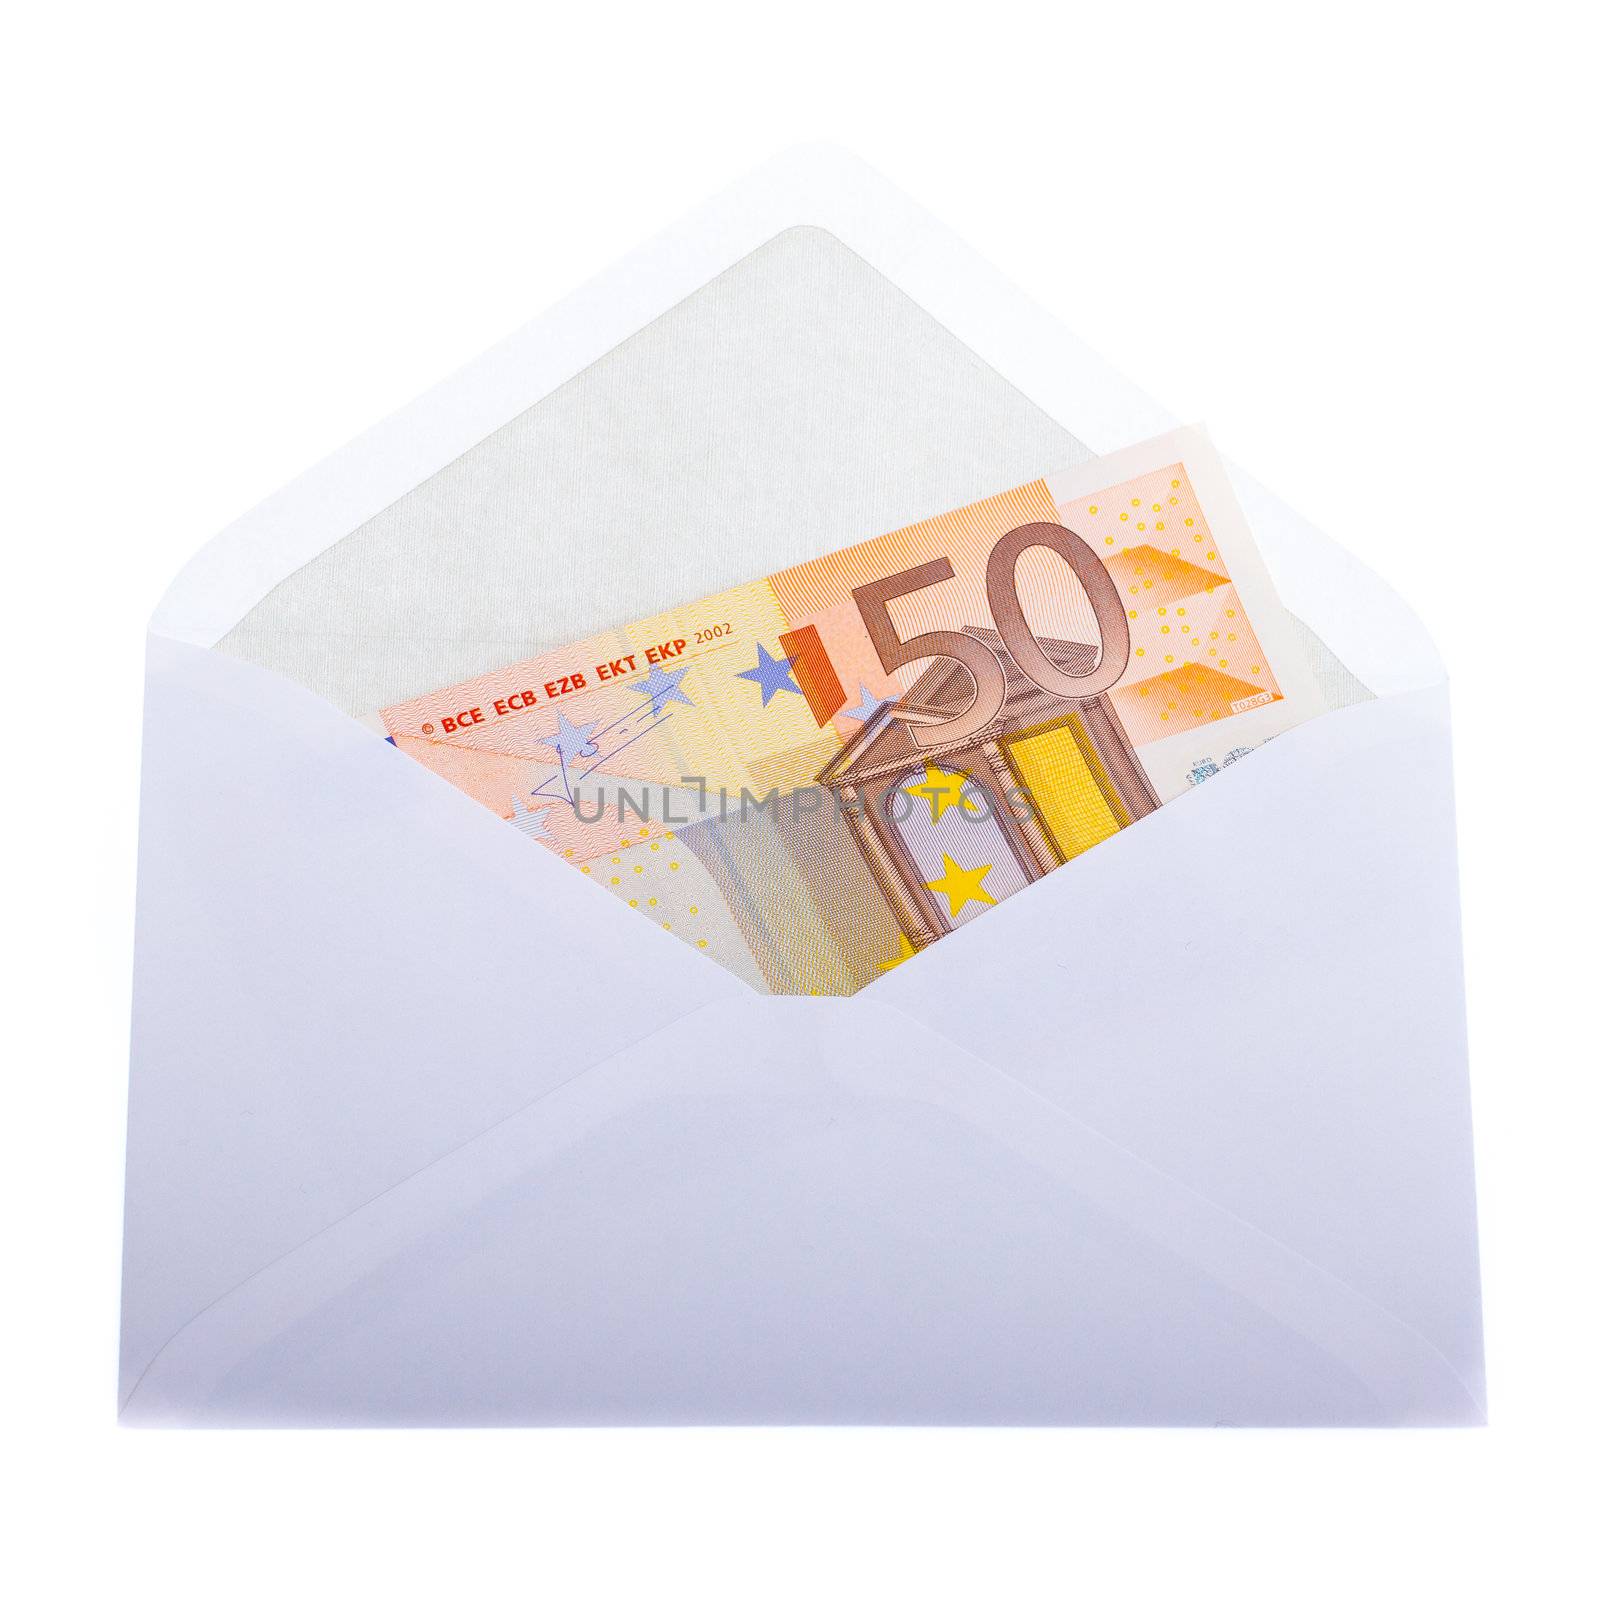 An 50 euro banknote in an envelope by michaklootwijk